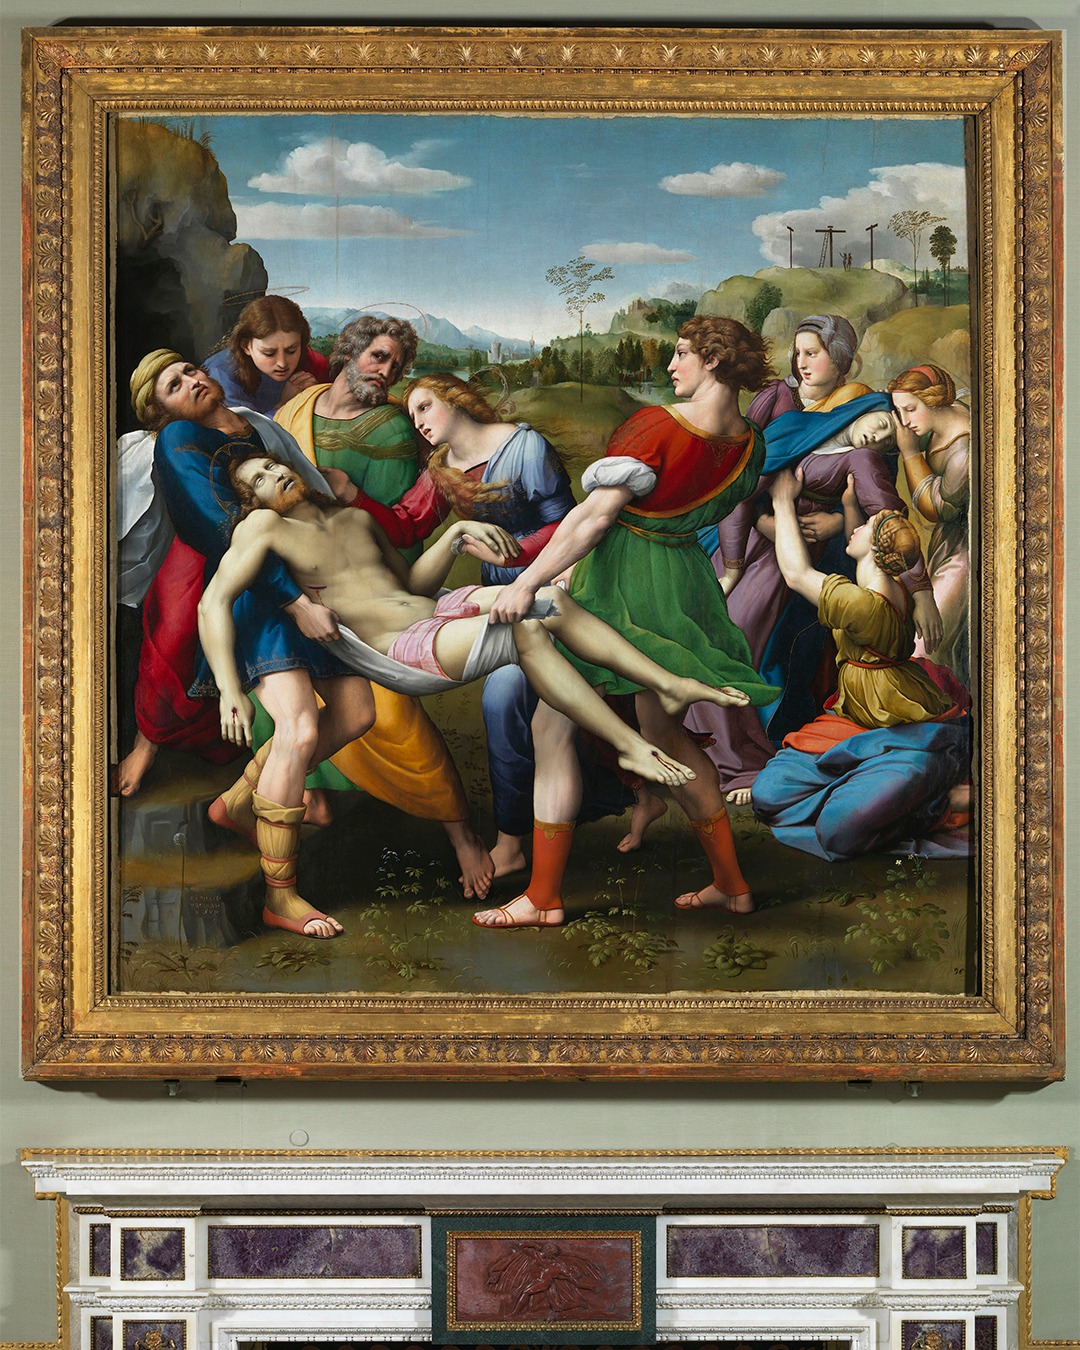 THE FIFTH CENTENARY OF THE DEATH OF RAPHAEL ON THE MUSEUM’S NEW YOUTUBE CHANNEL